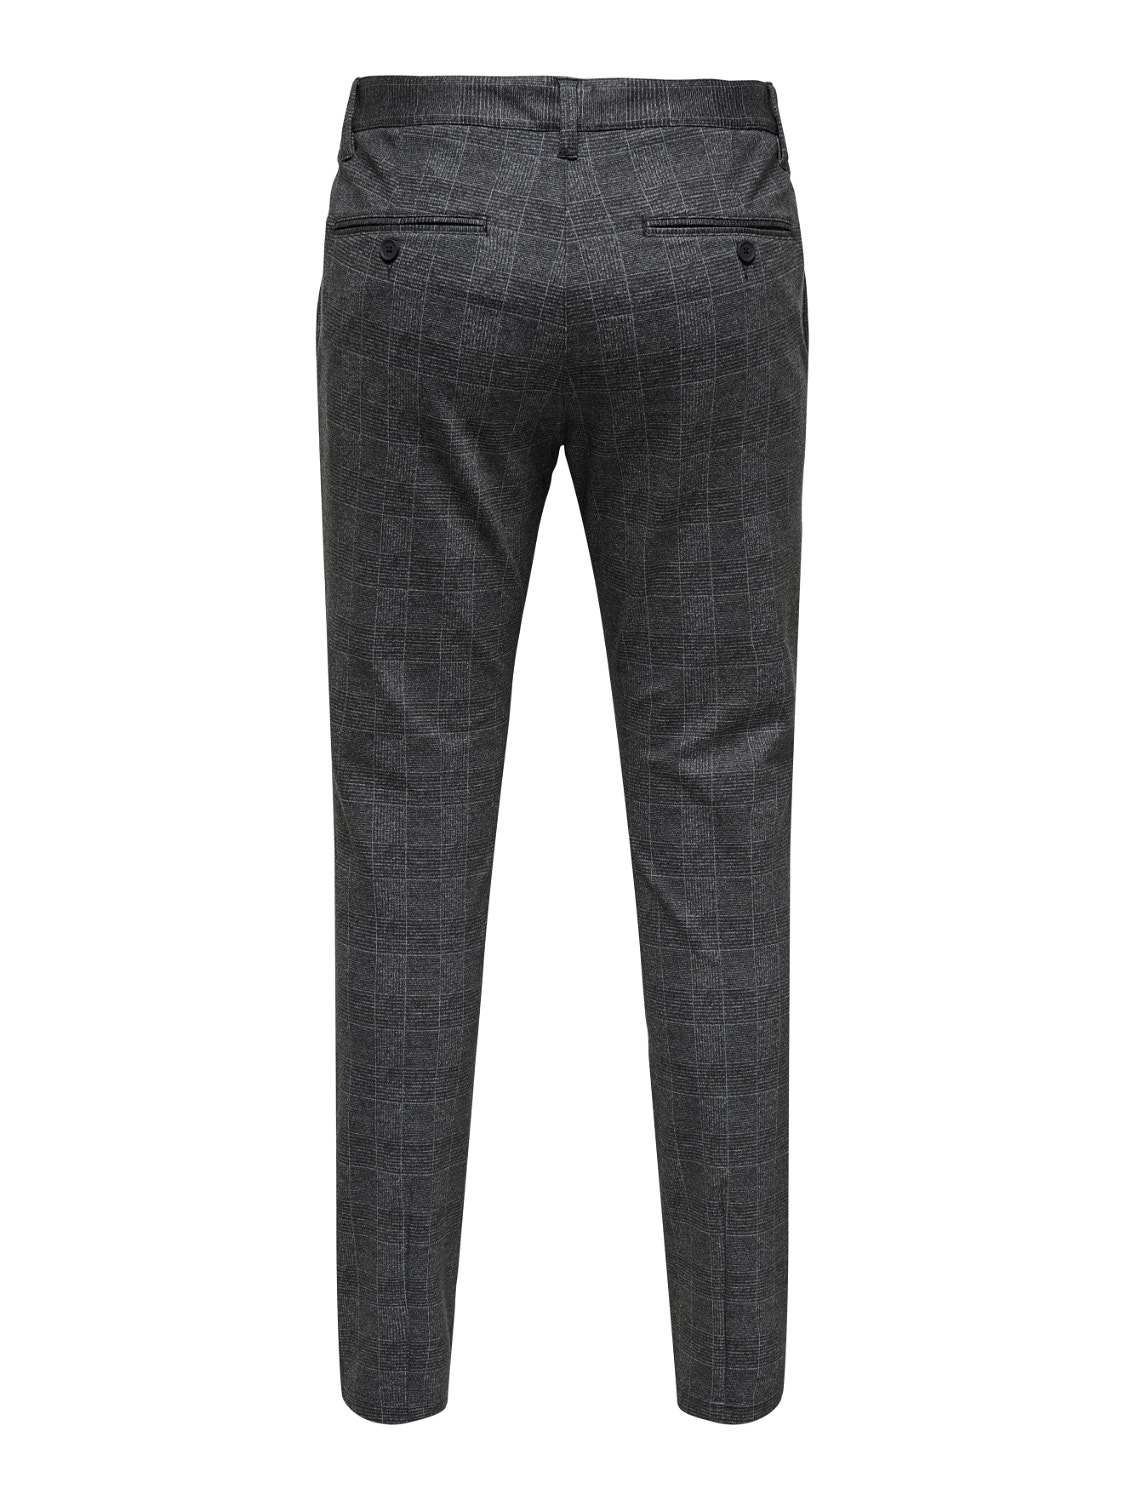 ONLY & SONS Checkered chinos -Black - 22019887